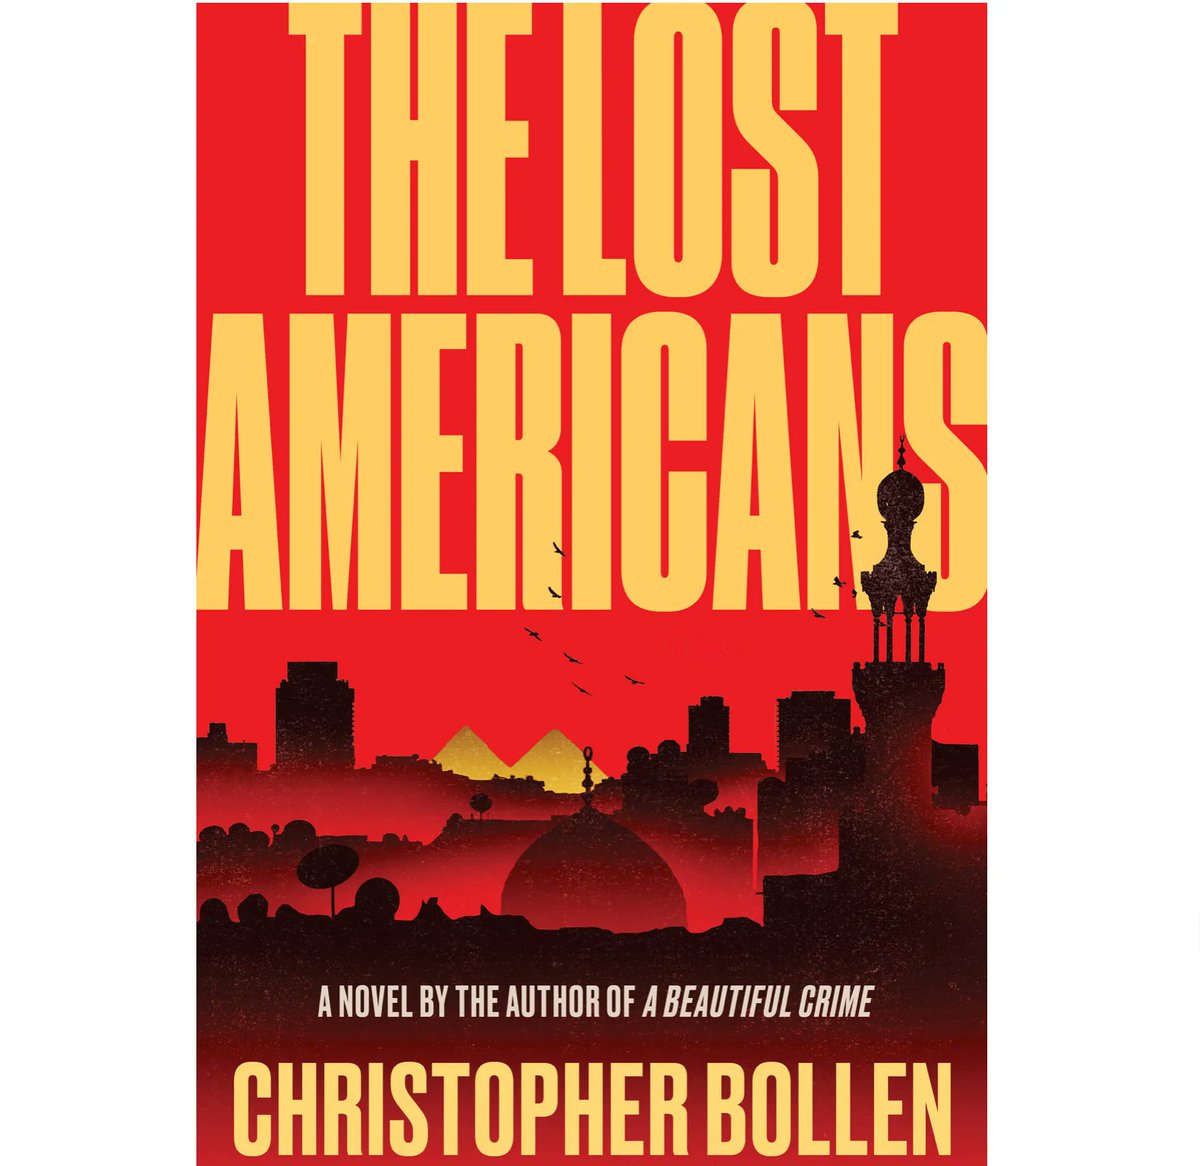 Christopher Bollen is the author of A Beautiful Crime (2020) and The Lost Americans (2023). A huge fan of Agatha Christie, he’s written short stories, articles, and essays for The New York Times, Interview, and others @christobollen #queercrimewriters #amreading